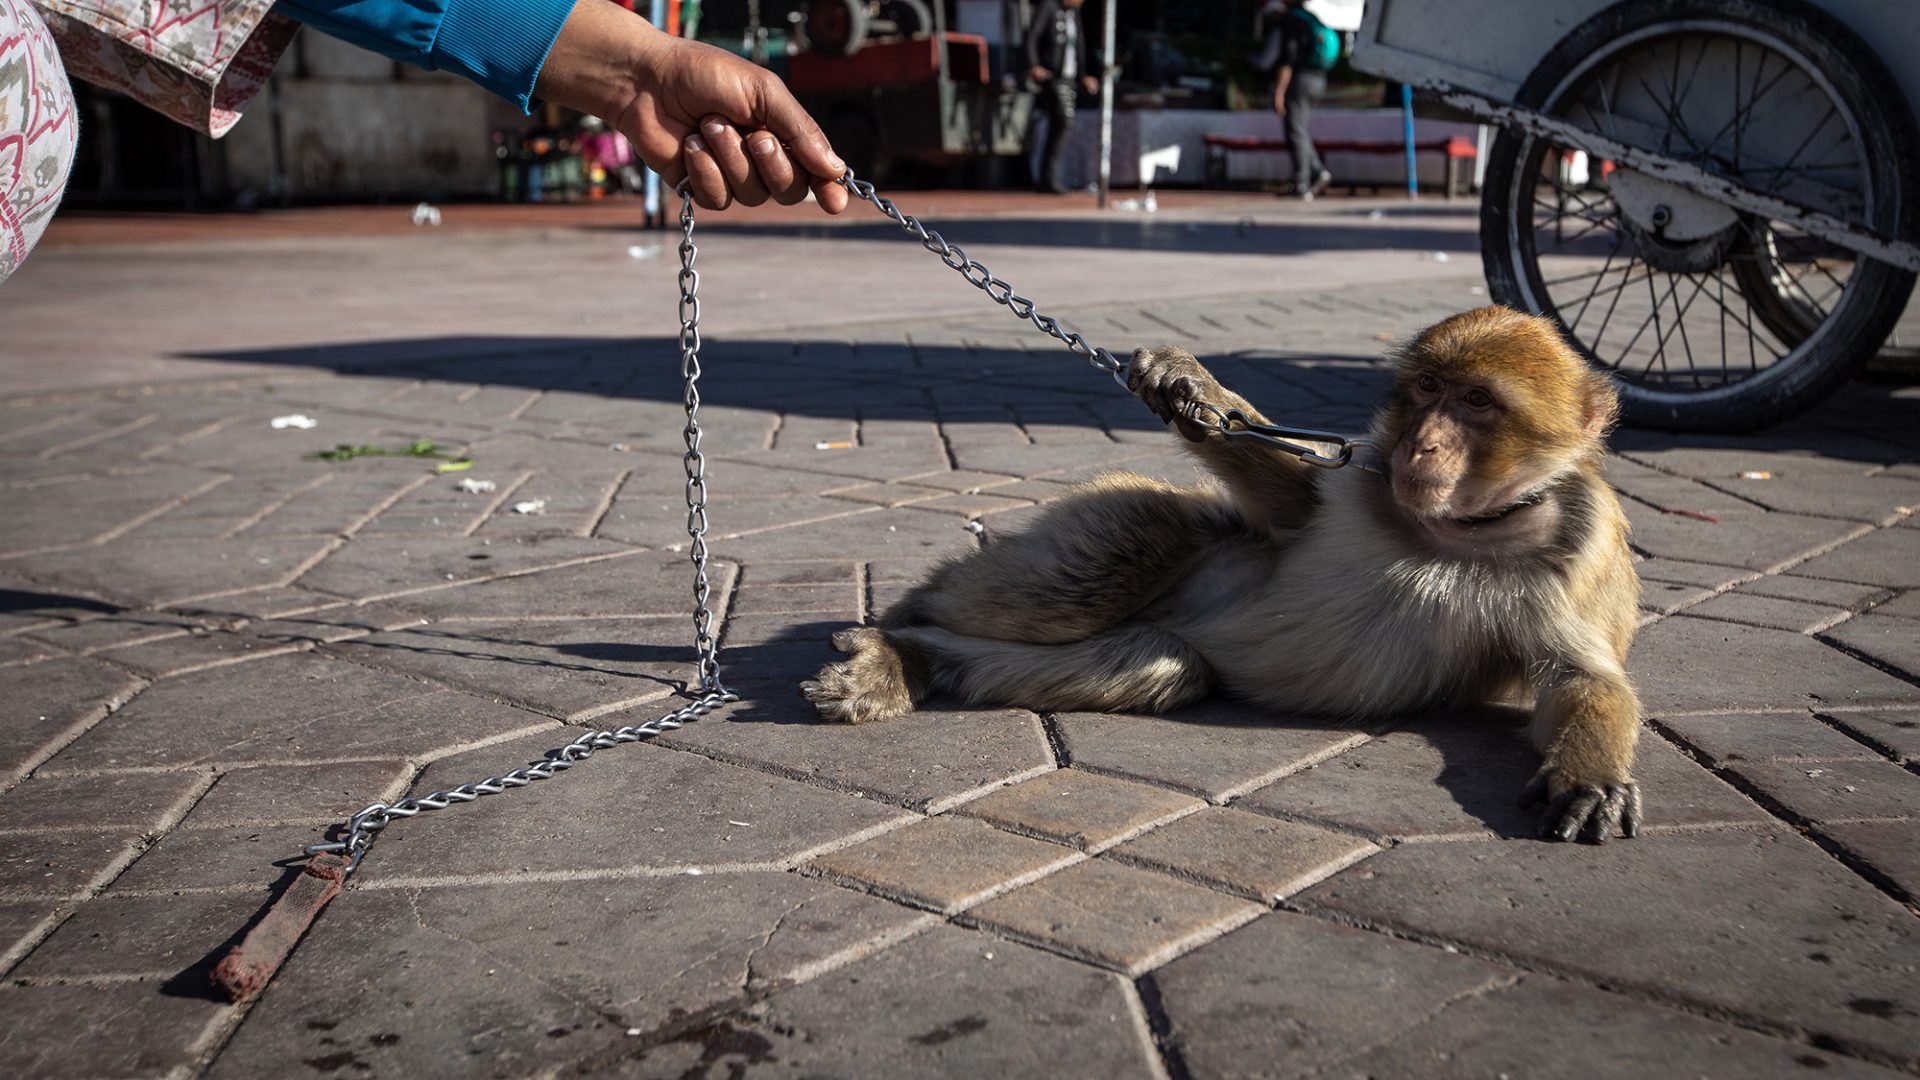 A macaque lies on paved ground with a chain around it's neck, with a human hand holding the chain